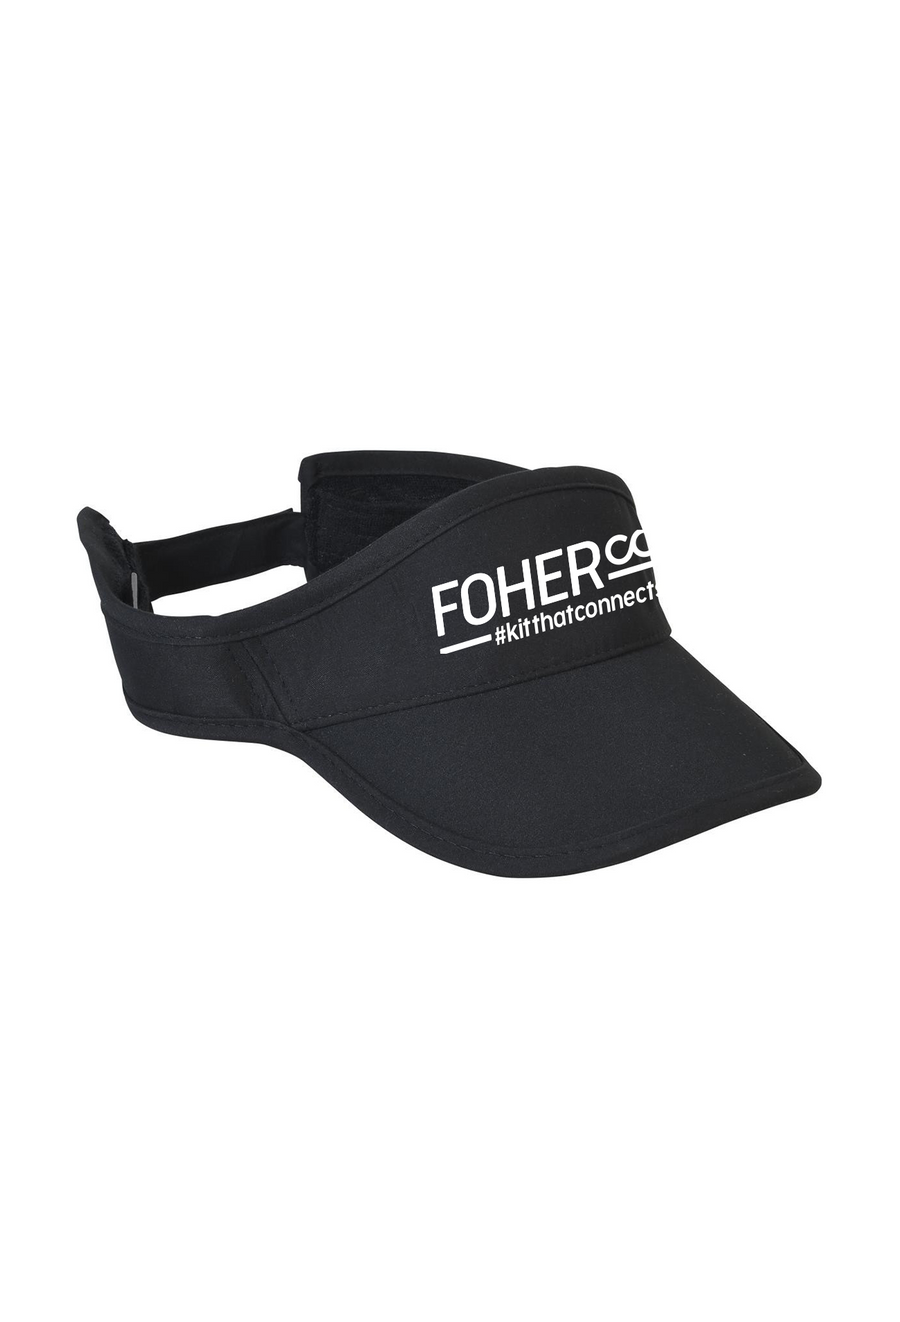 FOHER Co Kit that Connects Classic Visor